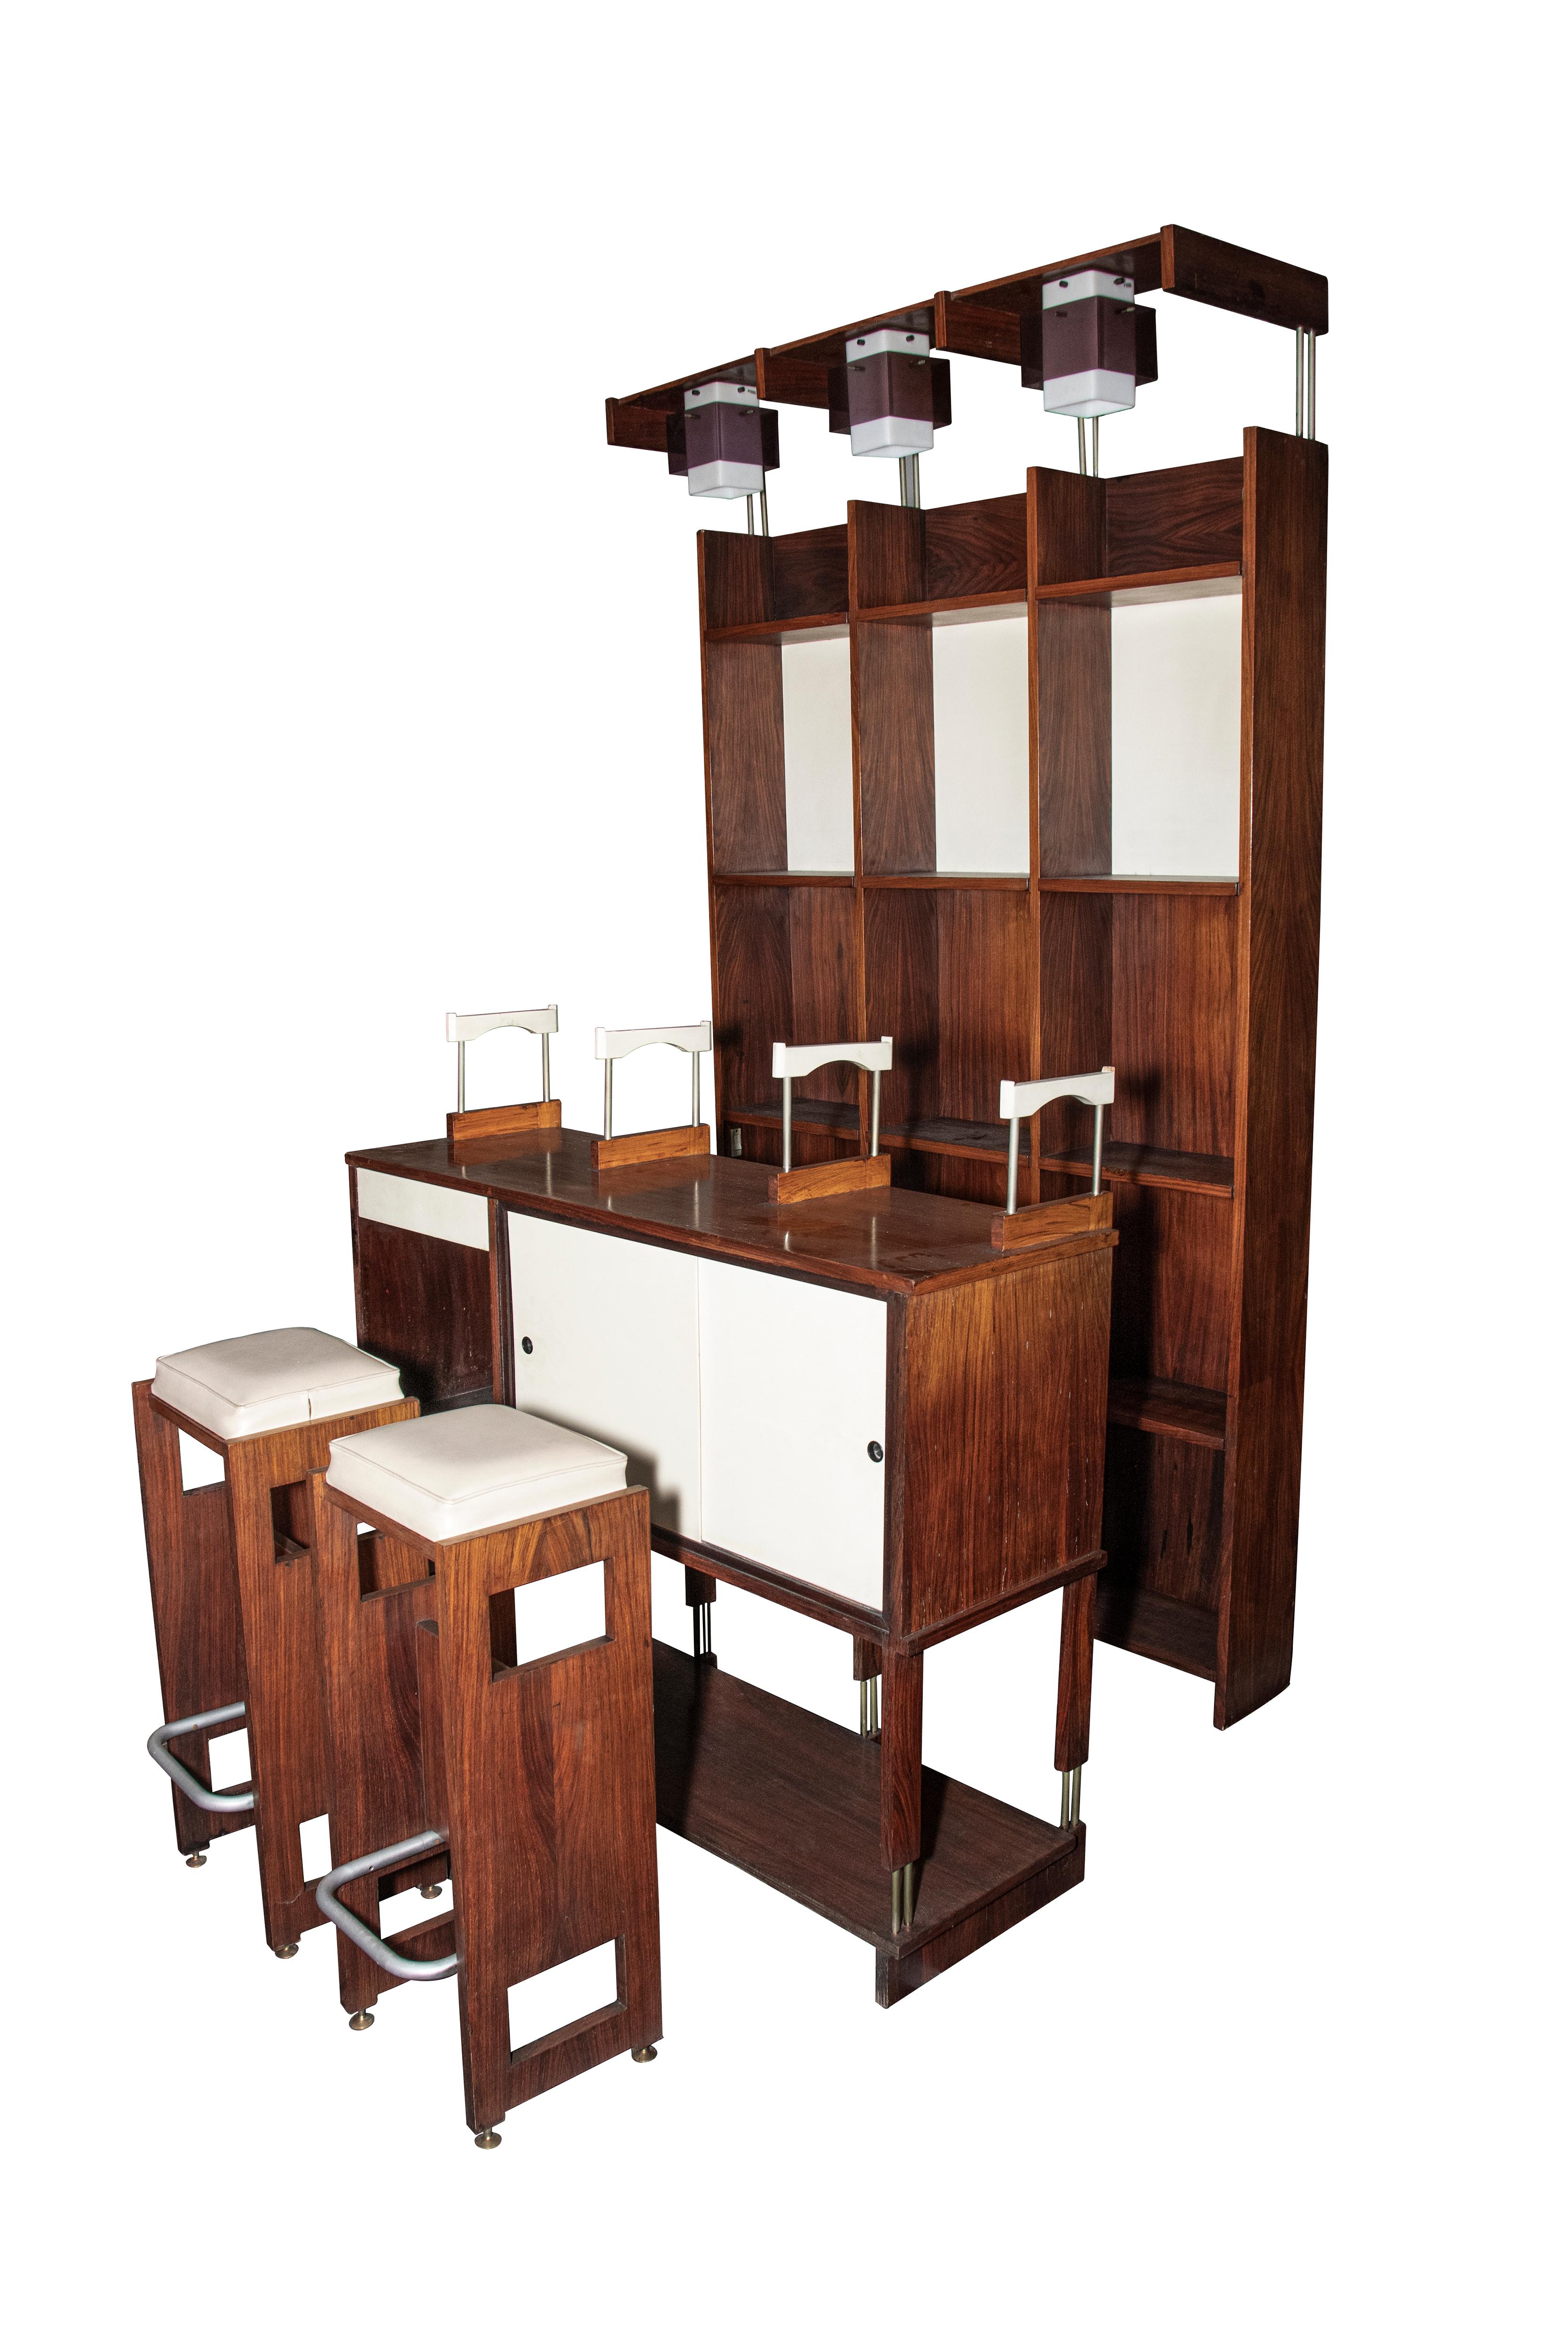 Vintage Italian dry bar is an item of original design furniture realized in the 1950s by Italian Manufacture.

The item is composed of a bar counter, wall unit, and two stools.

Walnut veneer core plywood, brass, lacquered wood, cut crystal. Opal